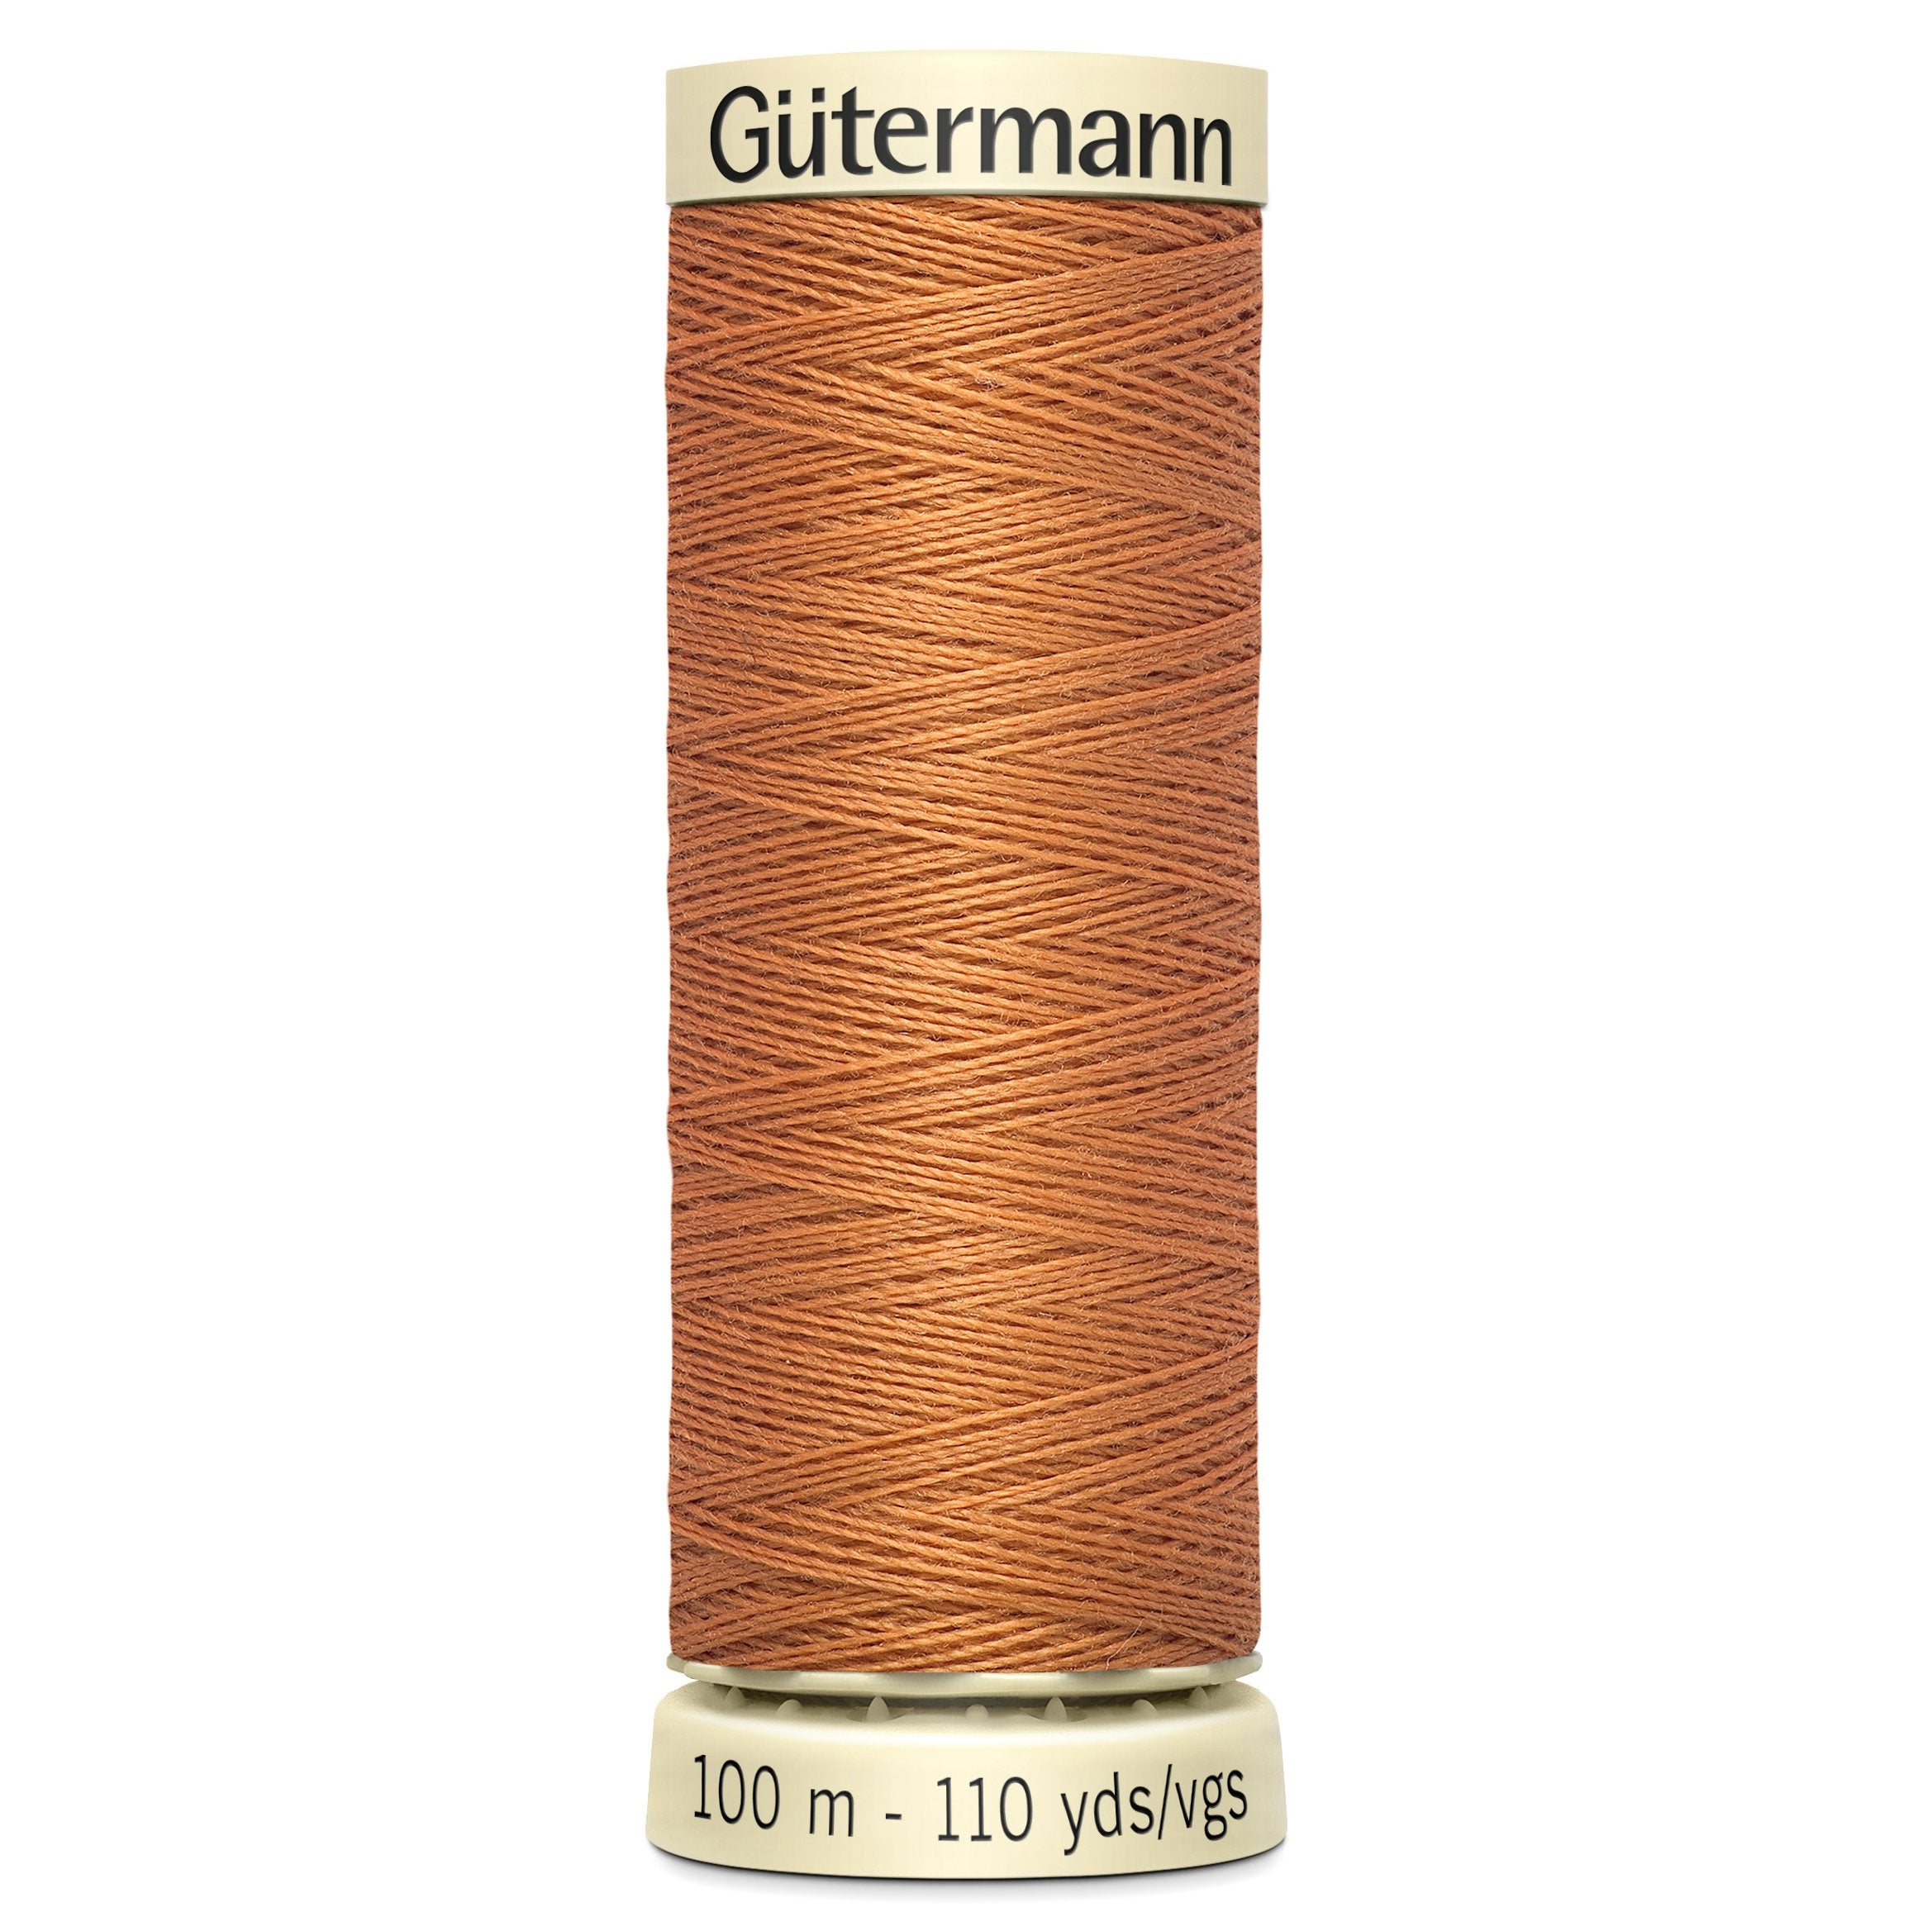 Gutermann Sew All Thread colour 612 Copper from Jaycotts Sewing Supplies